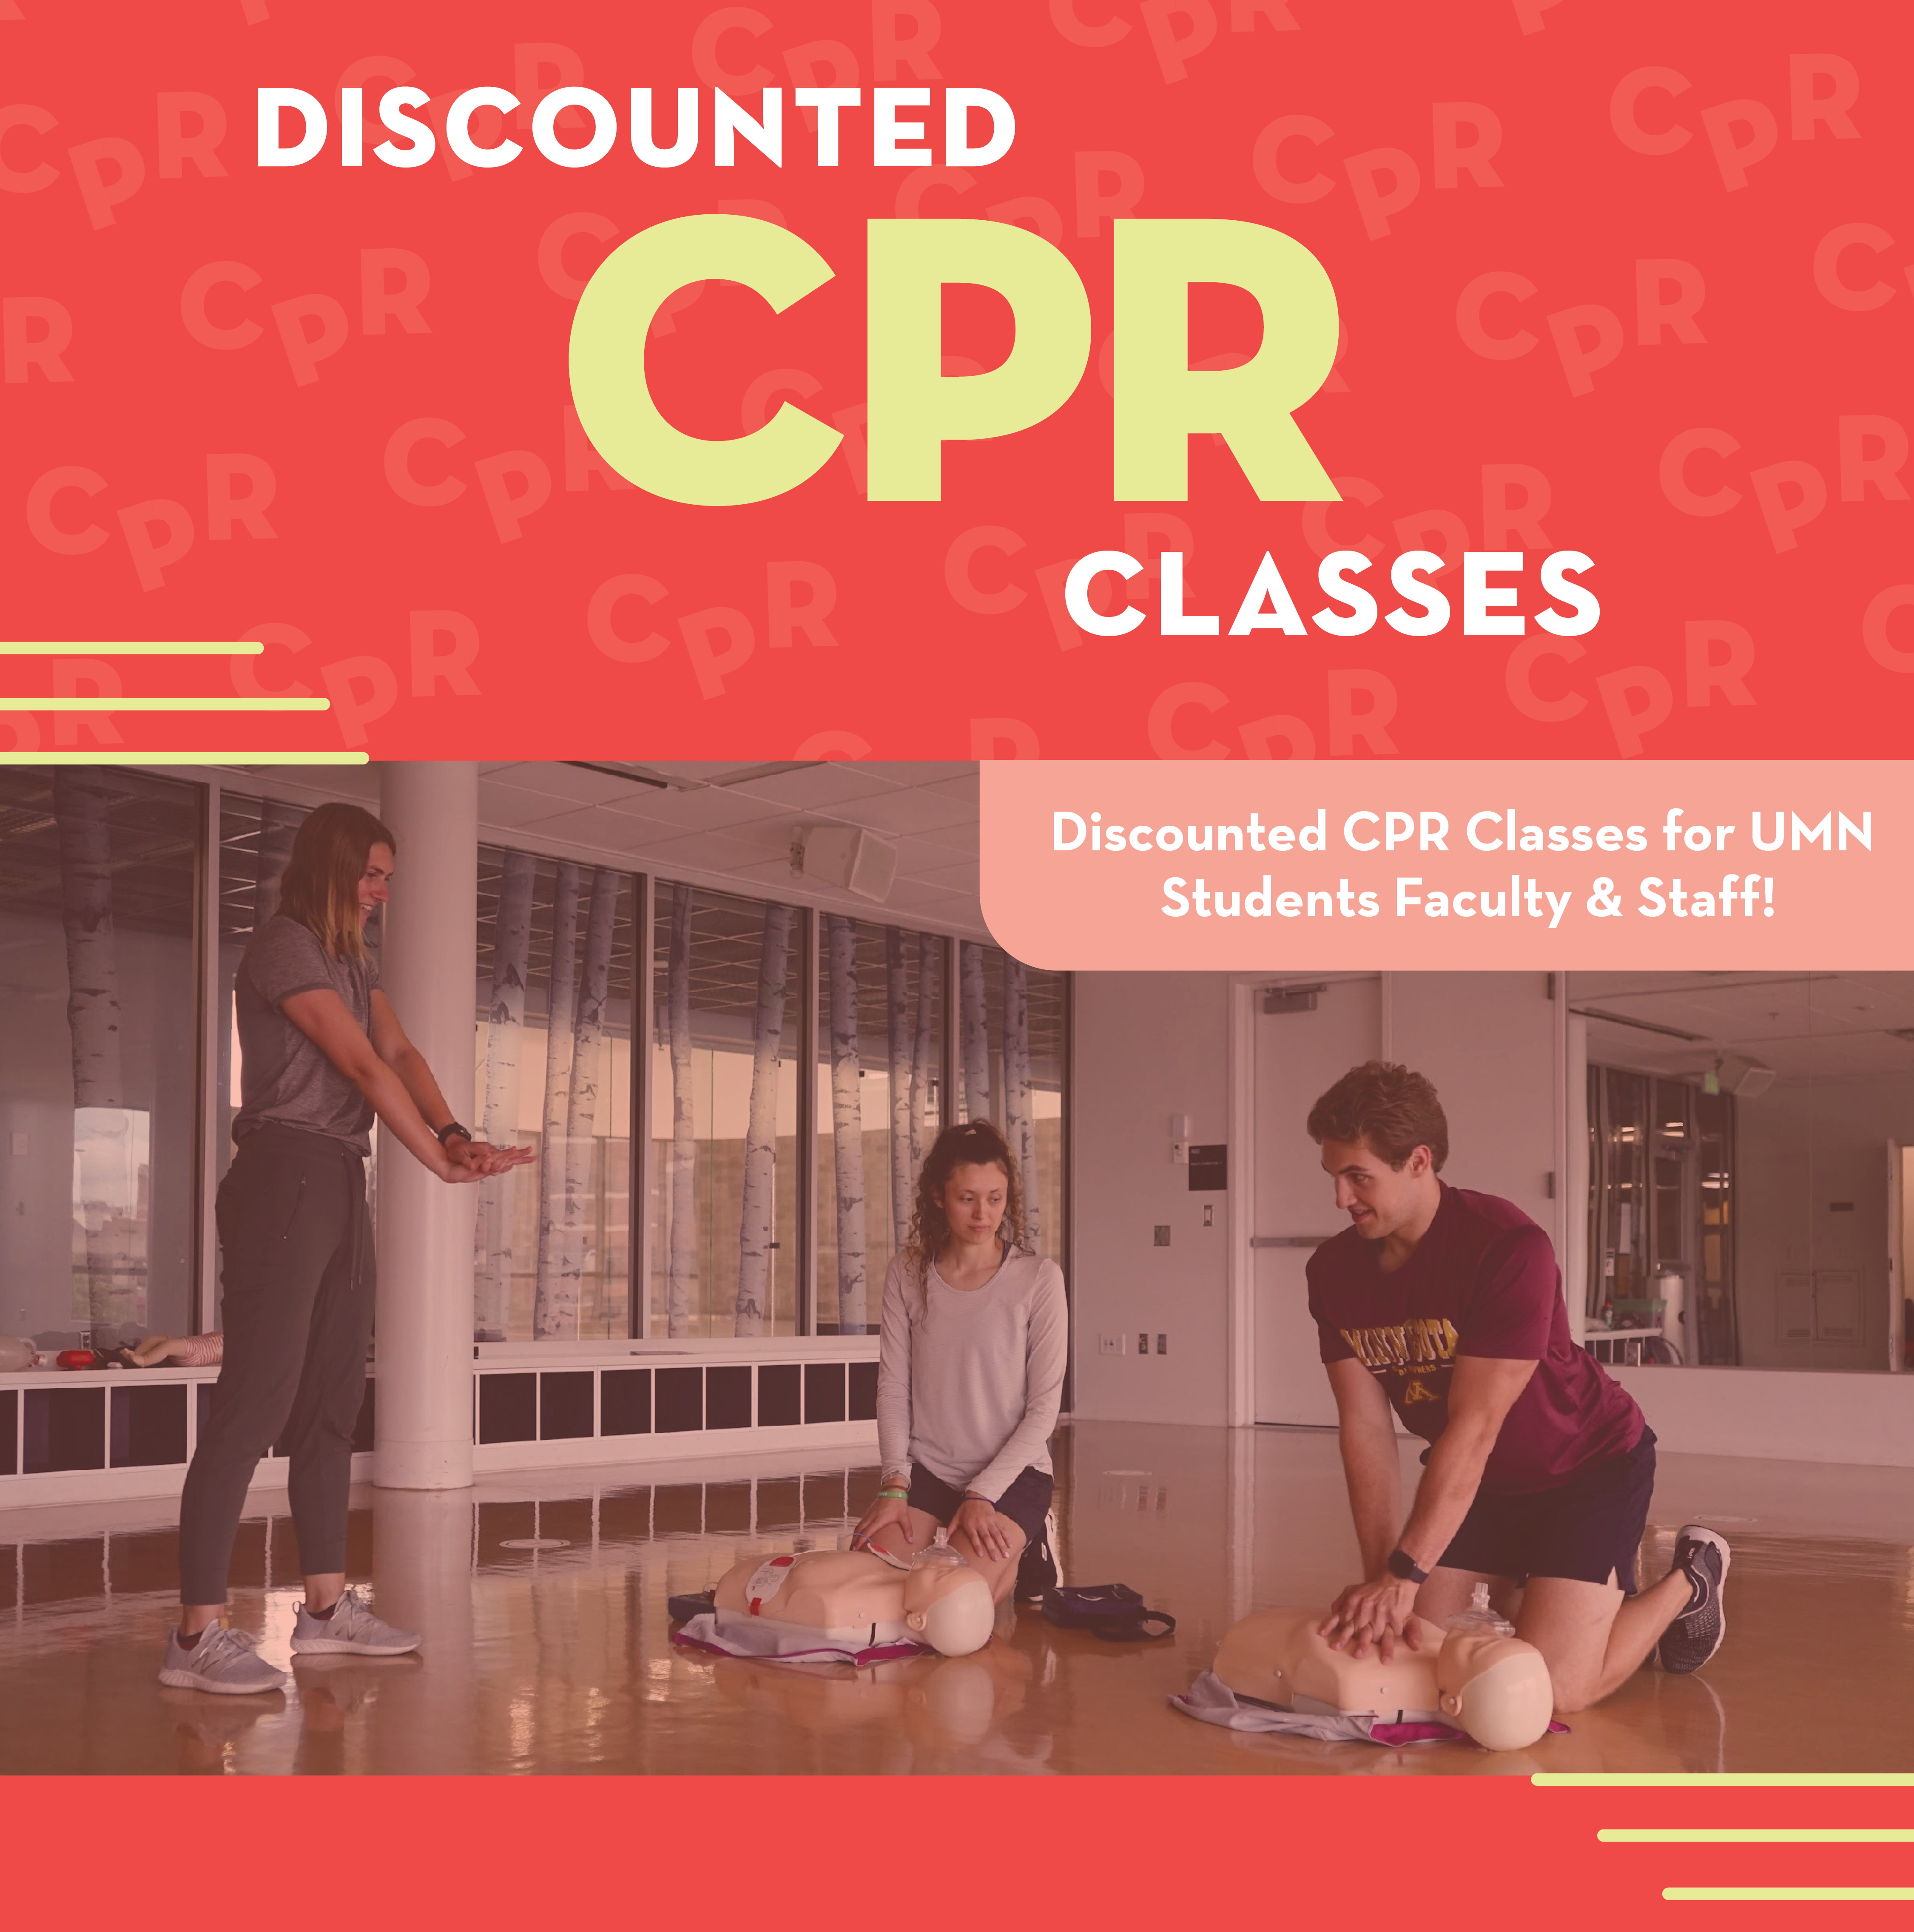 image of students completing a CPR course with the text "discounted CPR classes"